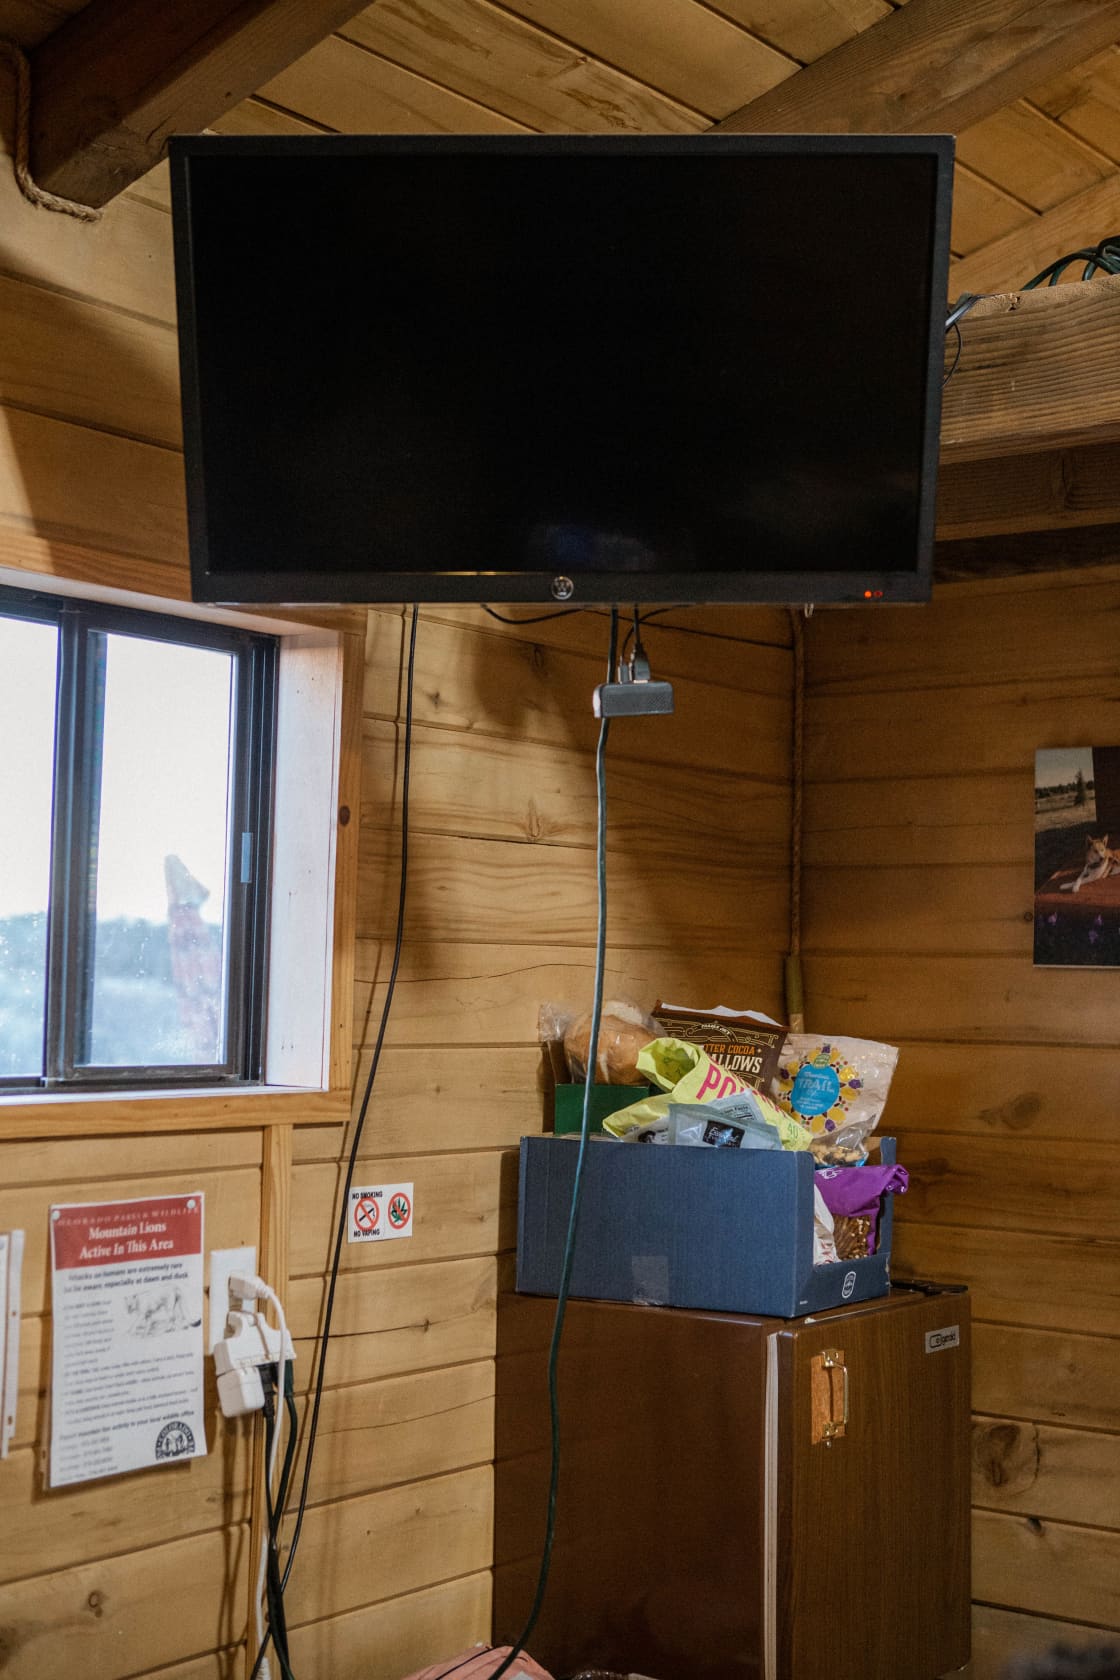 The cabin also has a TV with things like Netflix loaded onto it. 